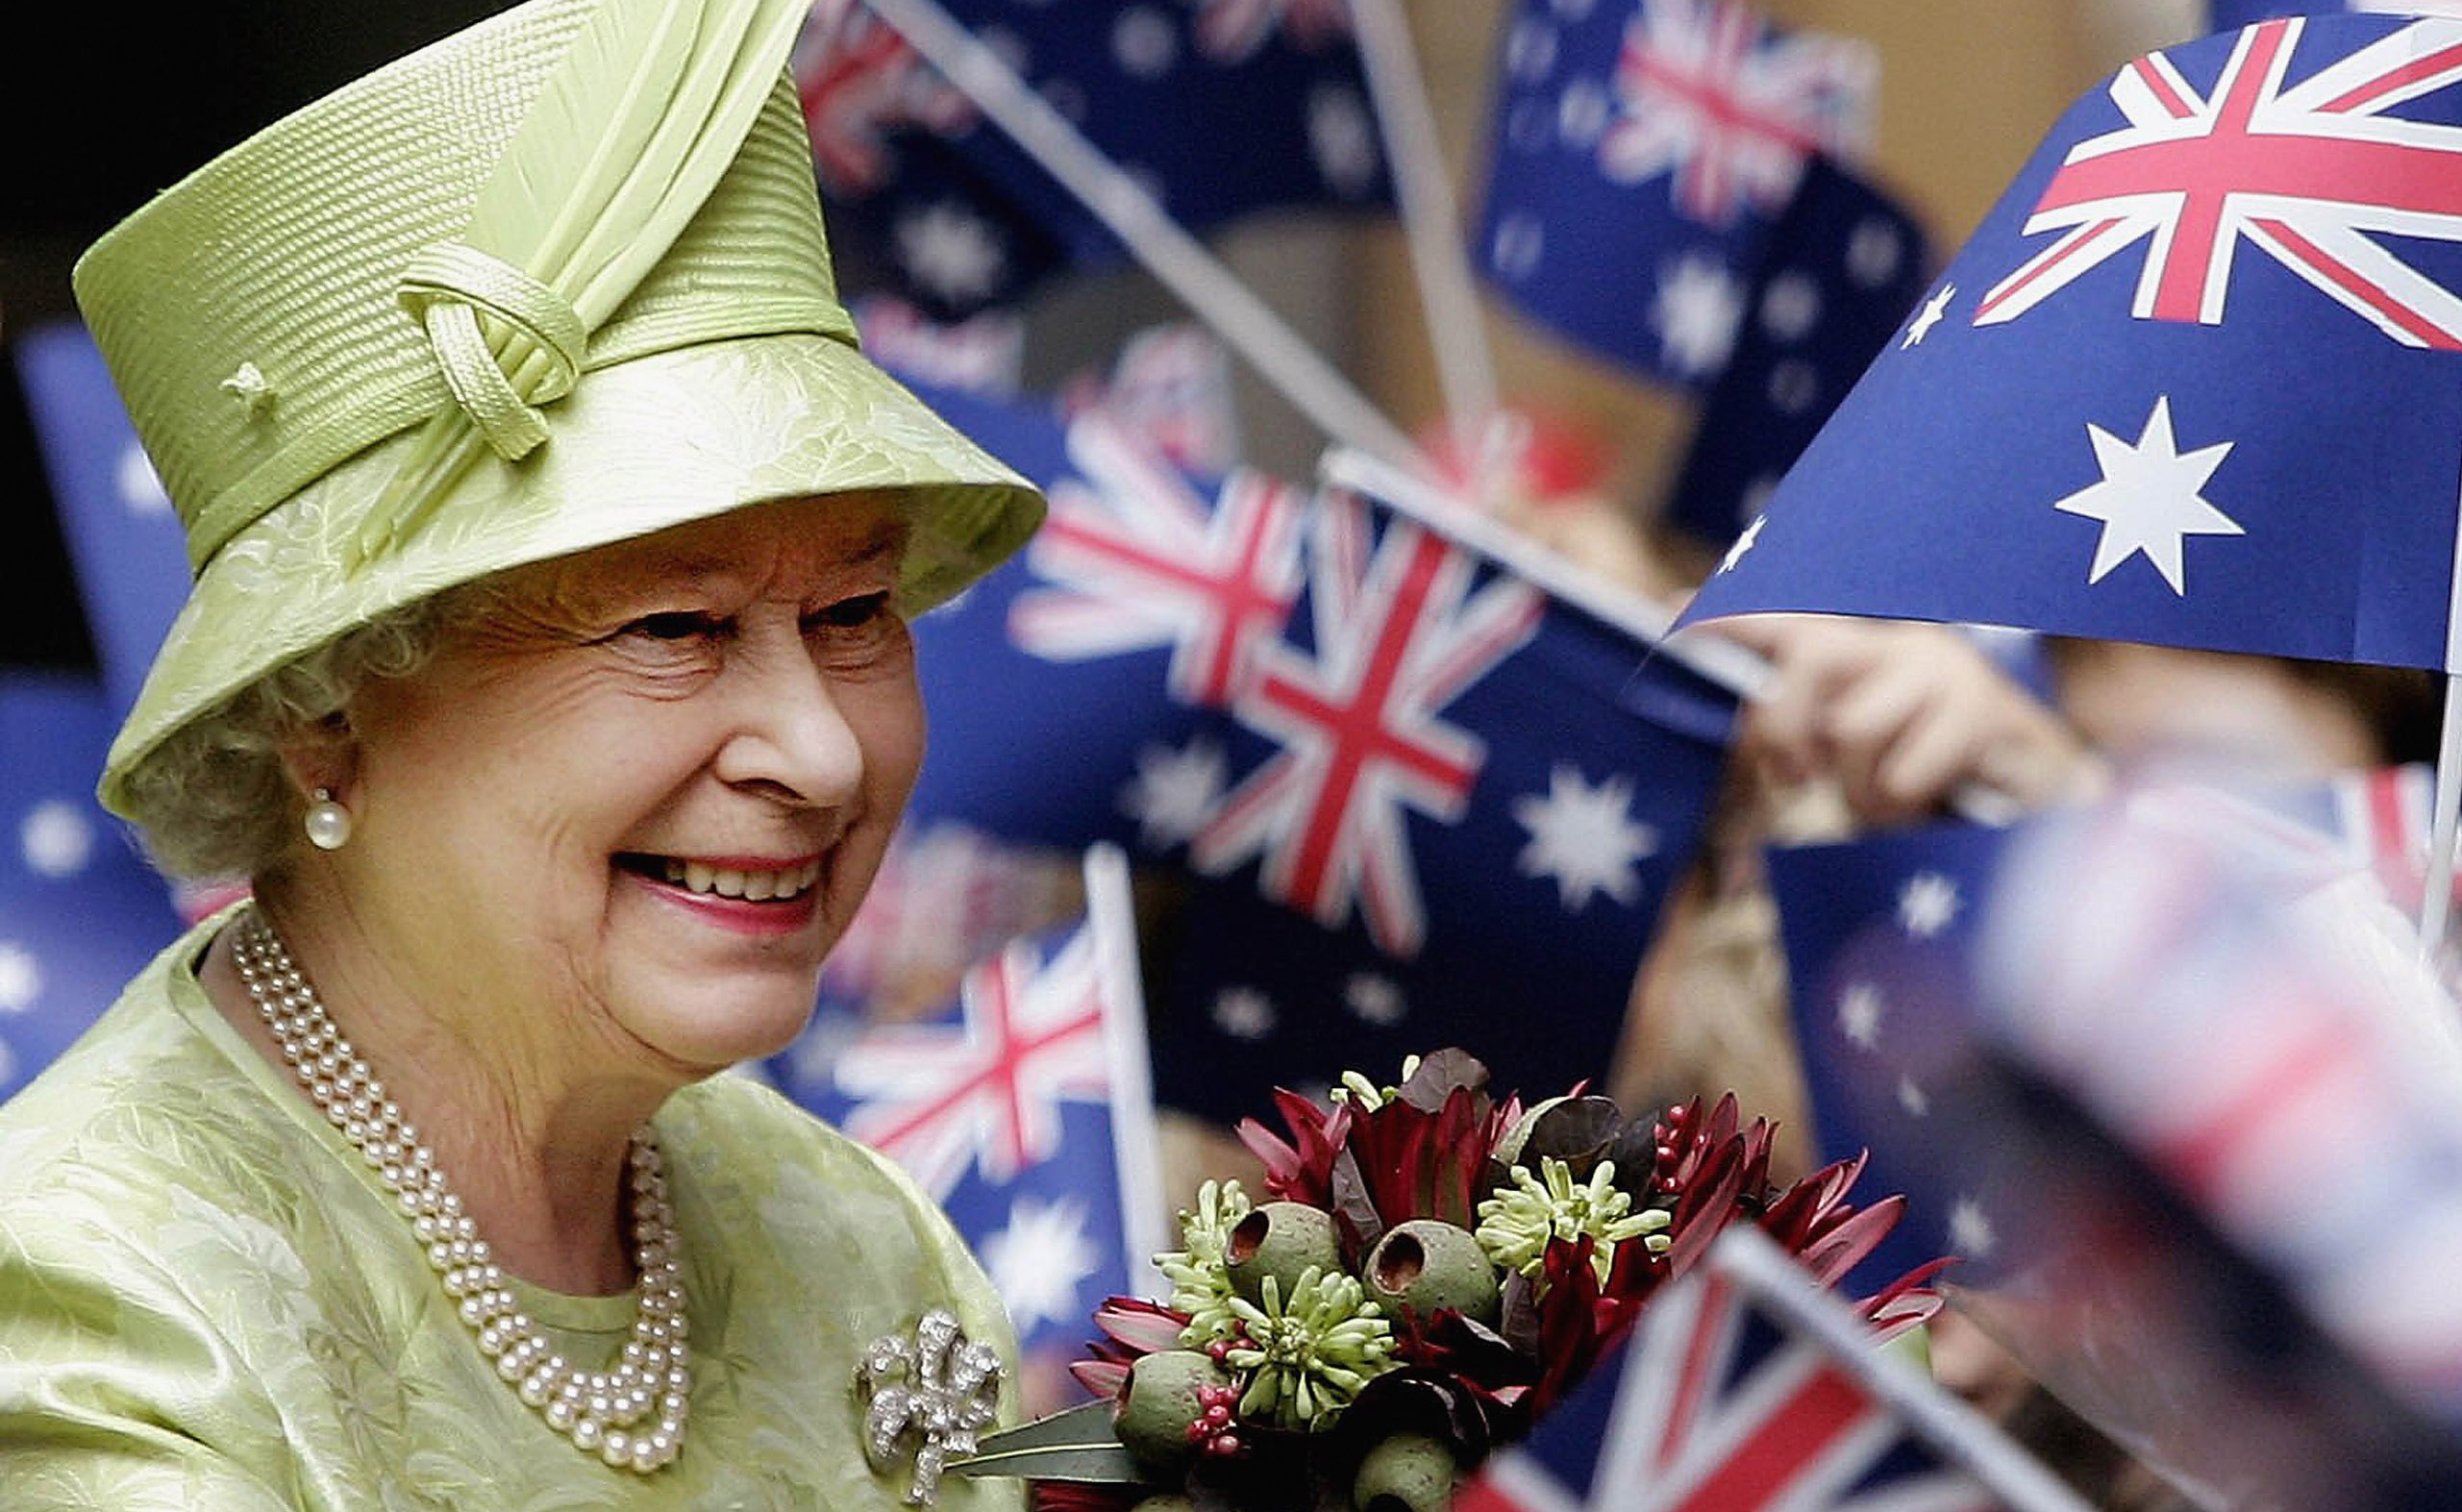 EXCLUSIVE: How the Queen has been “devoted to your service” for 70 historic years